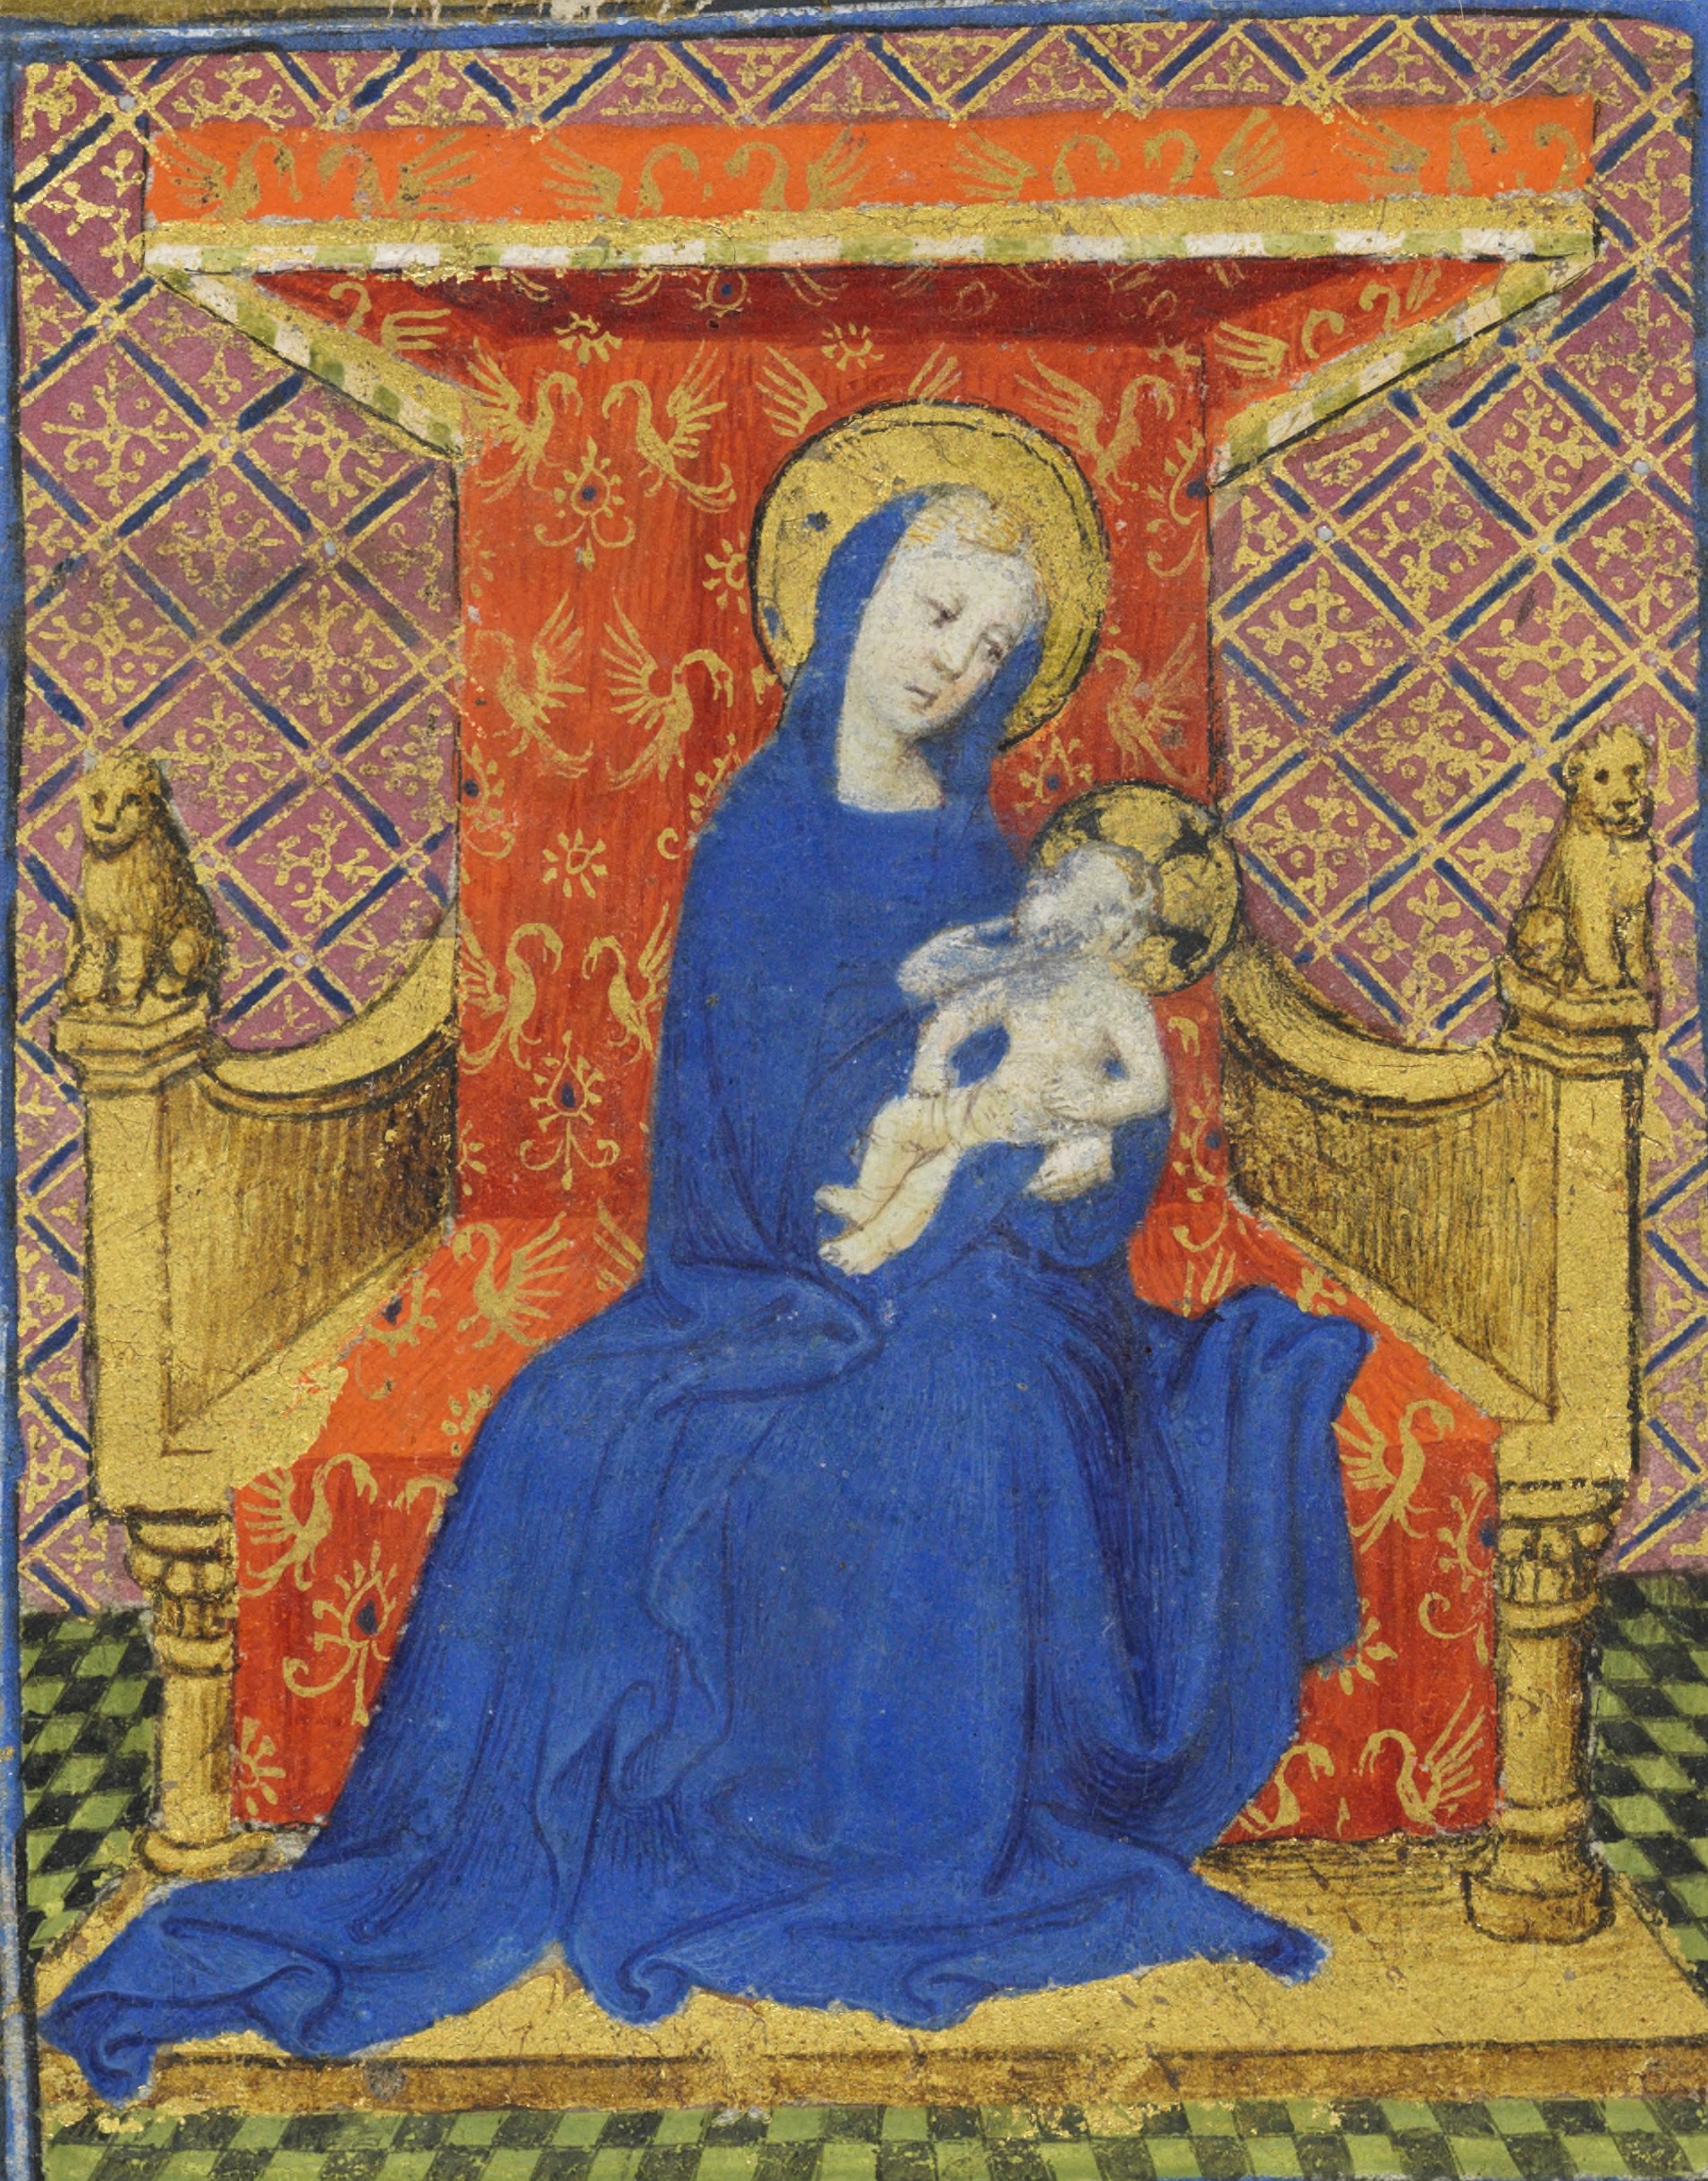 Book of hours from Paris